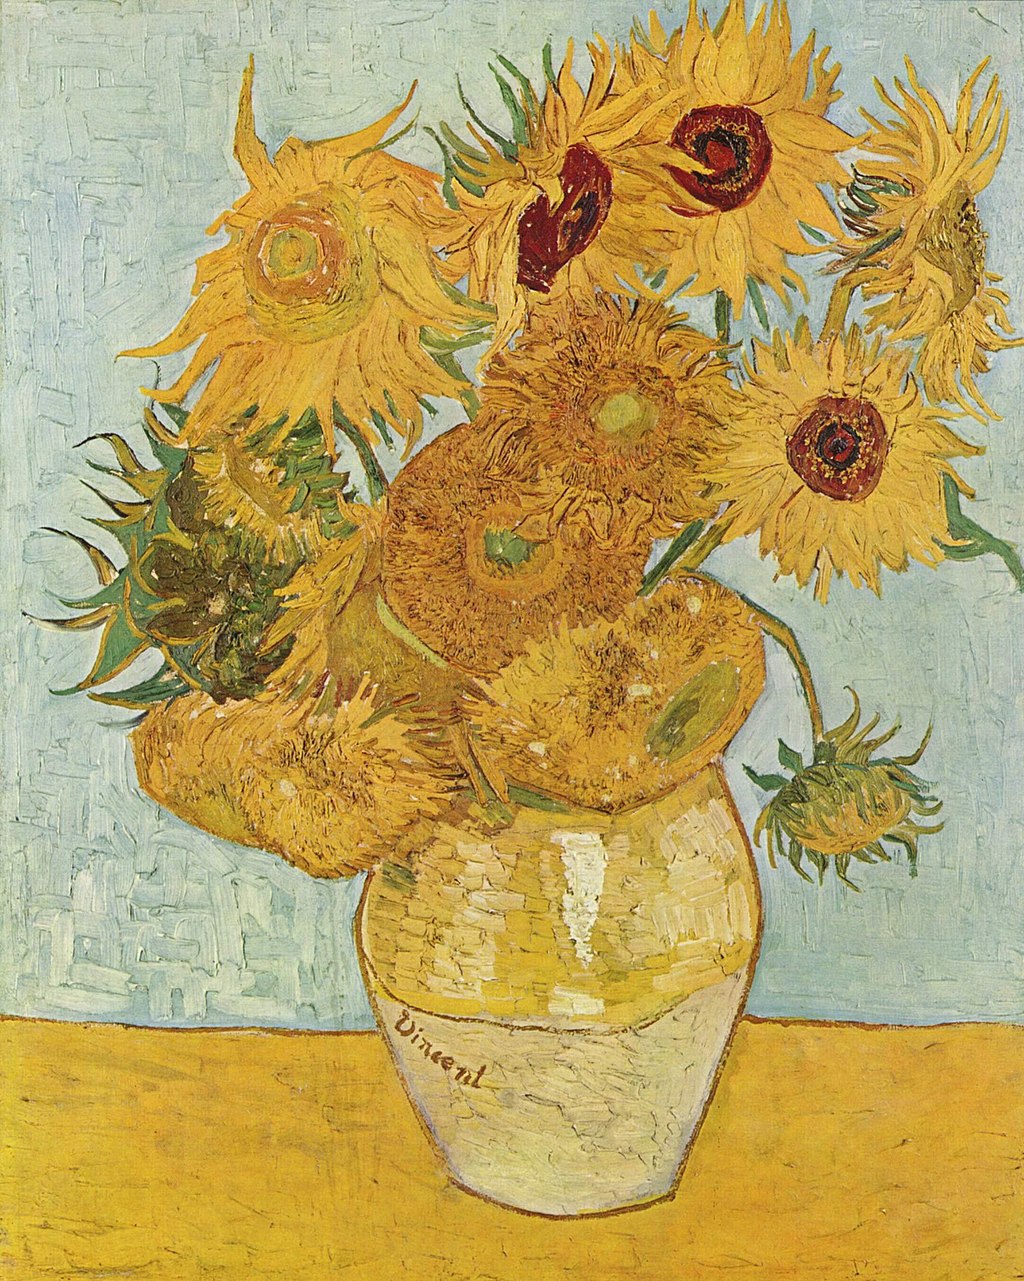 What Does Van Gogh Have to Do with Climate Activism?